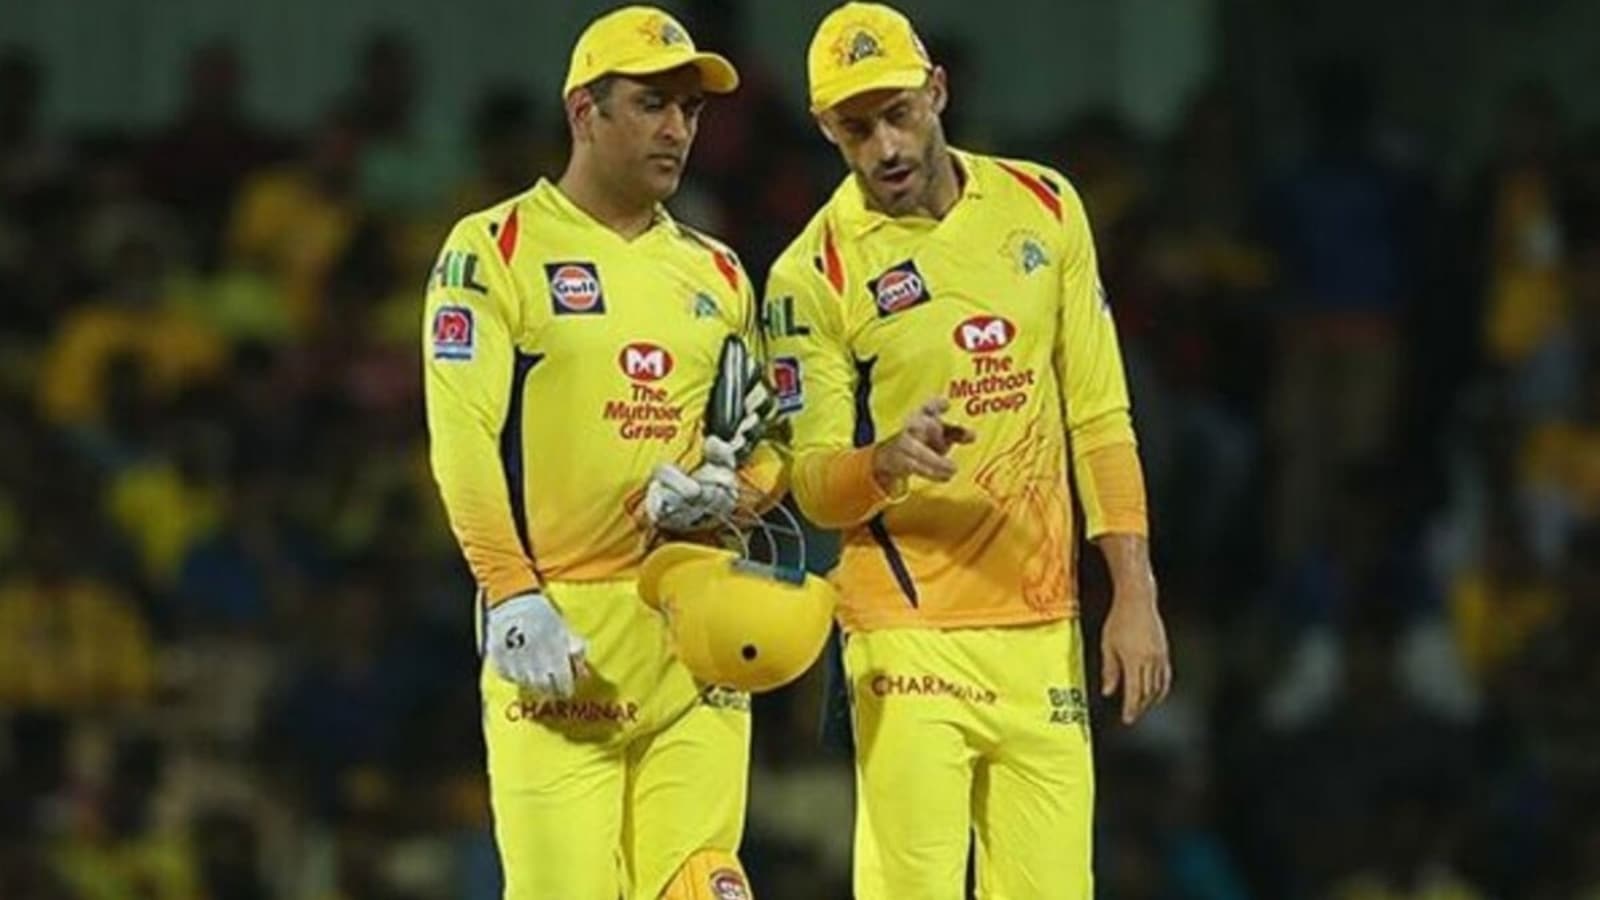 RCB vs PBKS Live: Faf du Plessis aims to take inspiration from MS Dhoni to rejuvenate RCB, says 'Feels lucky to play under Dhoni'